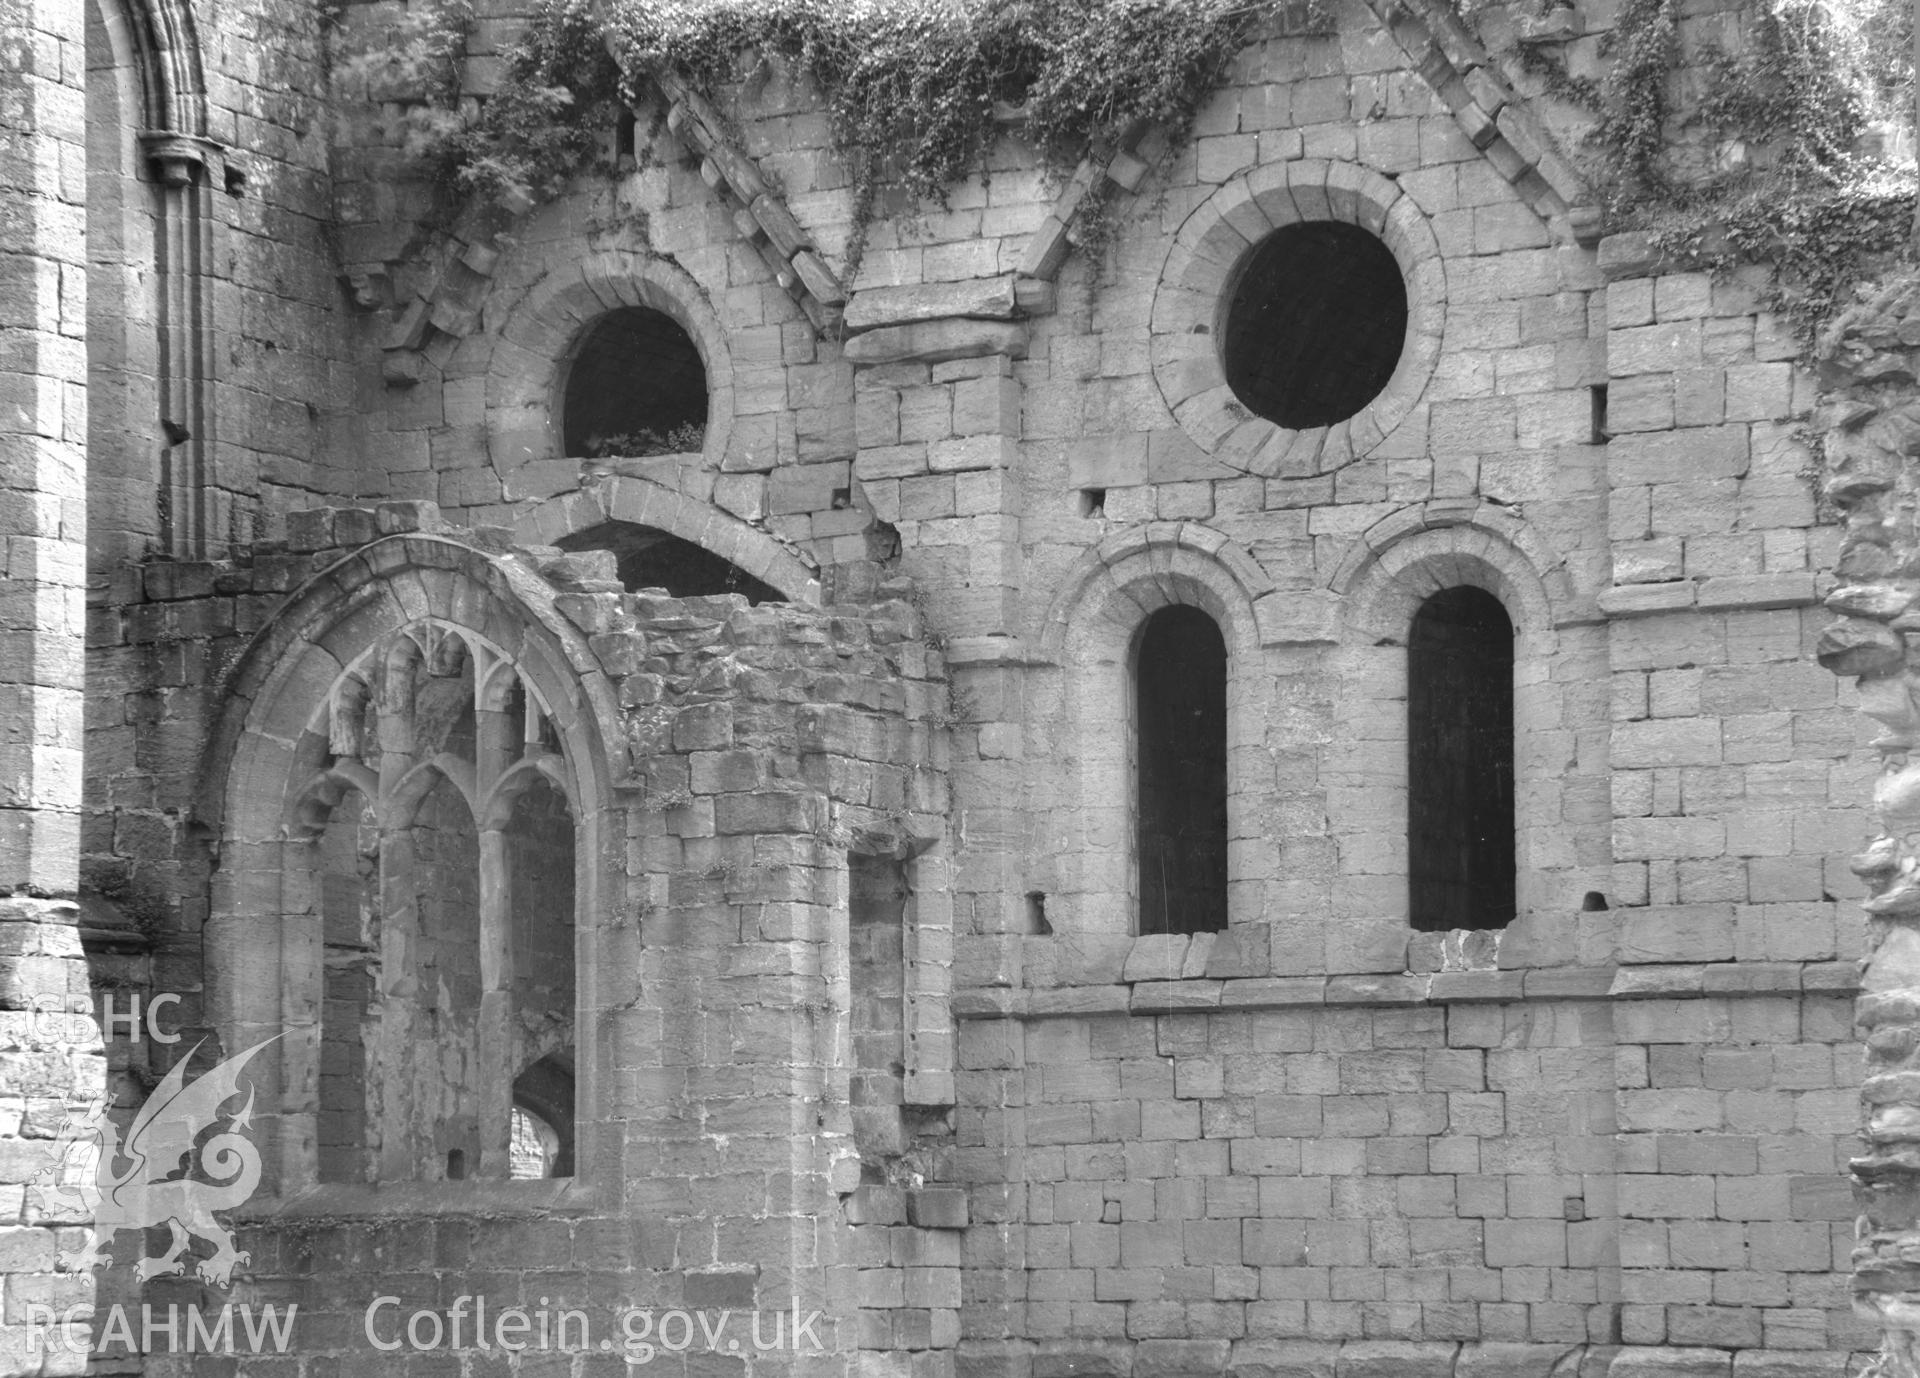 Digital copy of a black and white nitrate negative showing exterior view of St. David's Cathedral, taken by E.W. Lovegrove, July 1936.